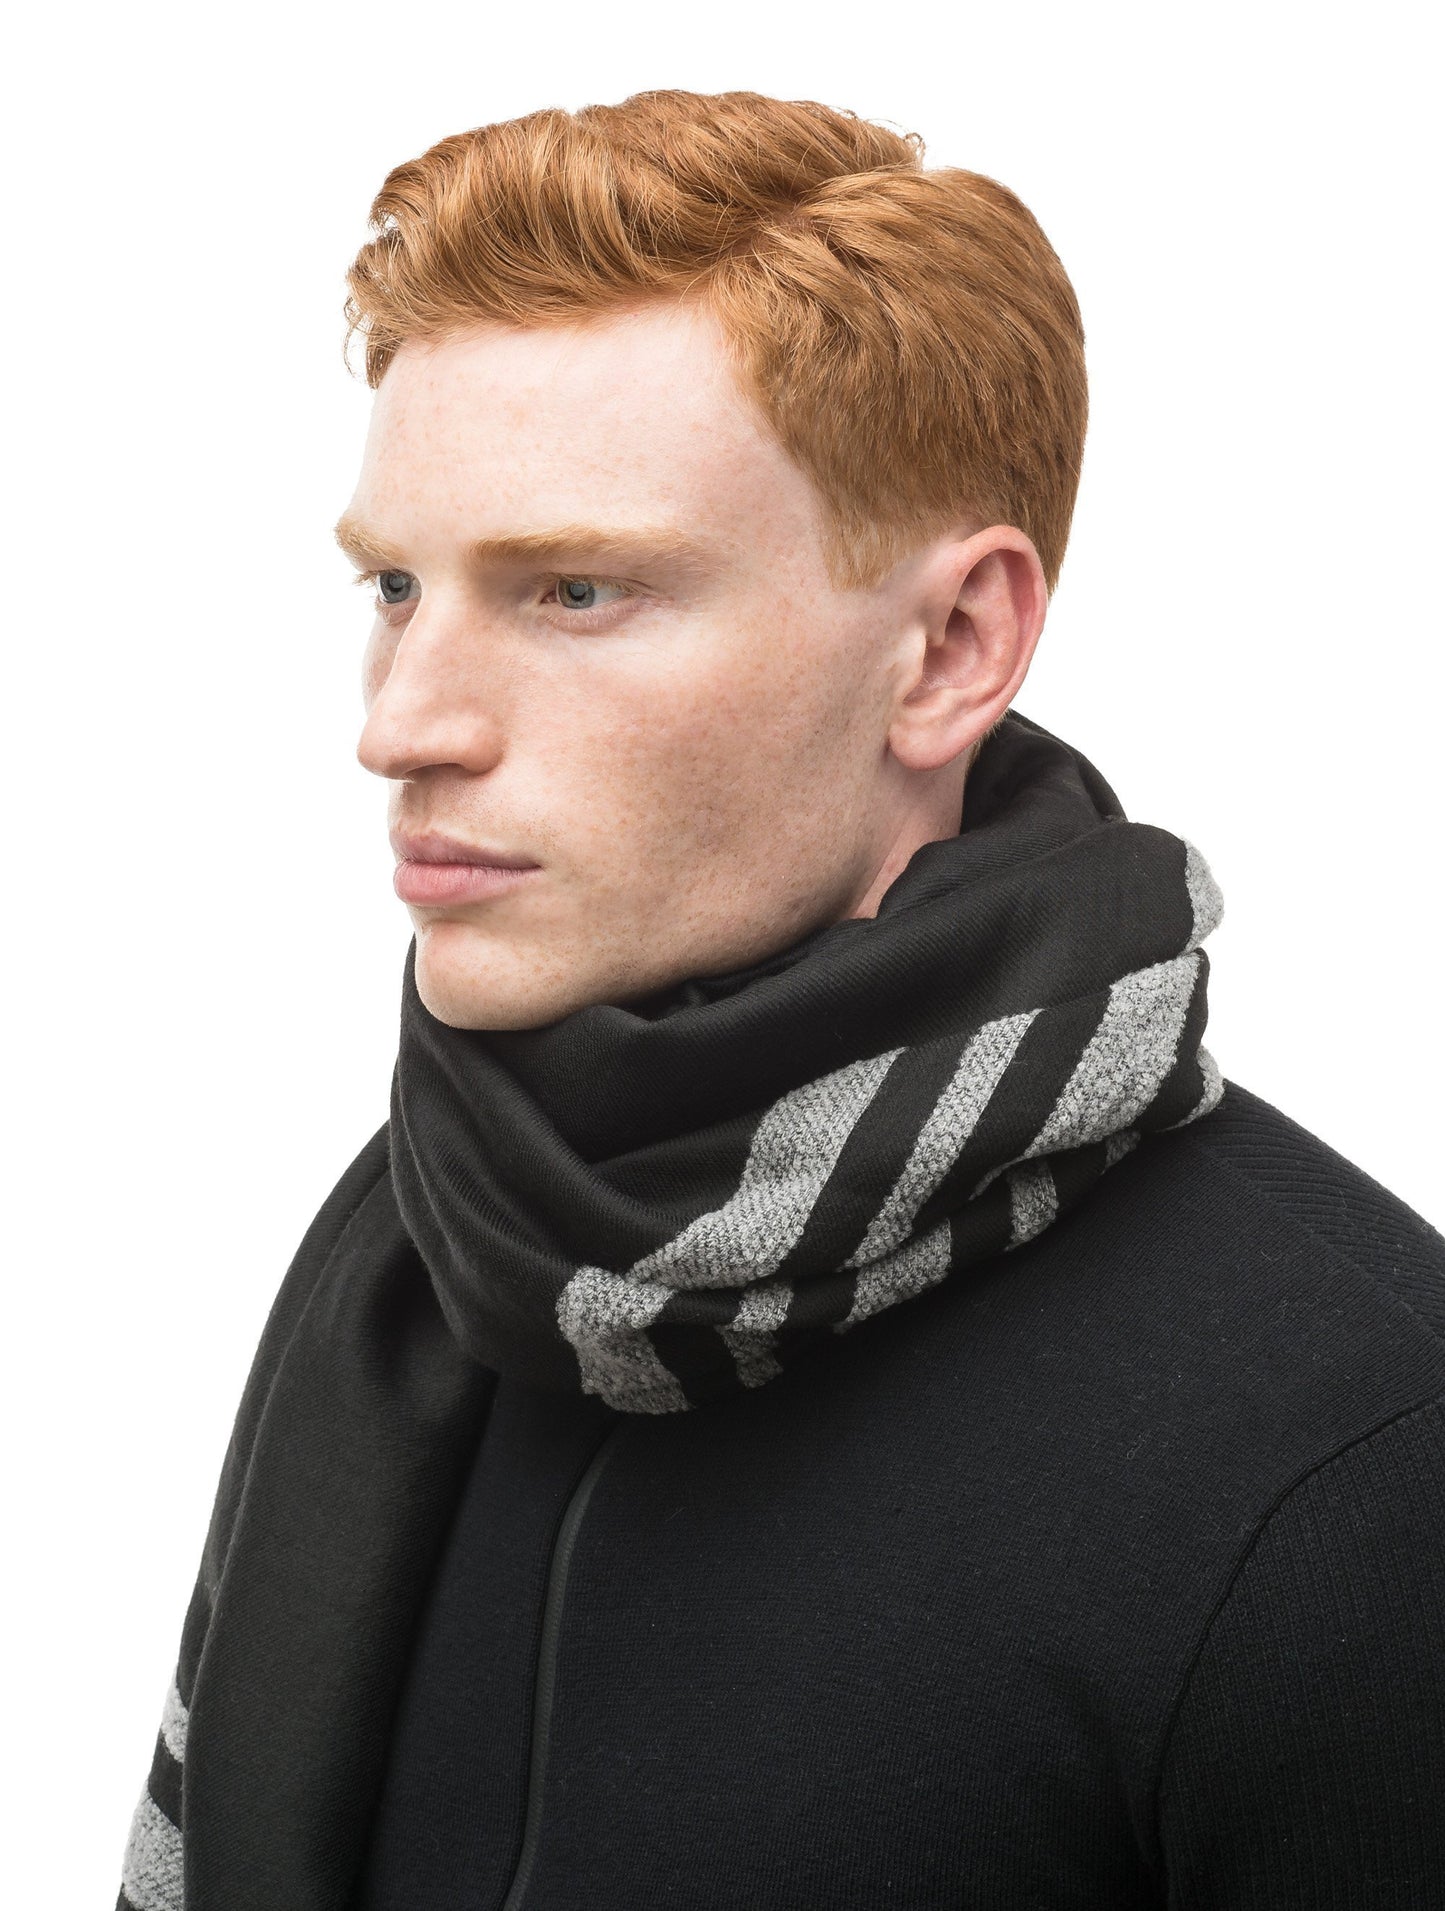 Woven scarf with contrasting chenille stripes and fringe finish on ends in Dk Grey